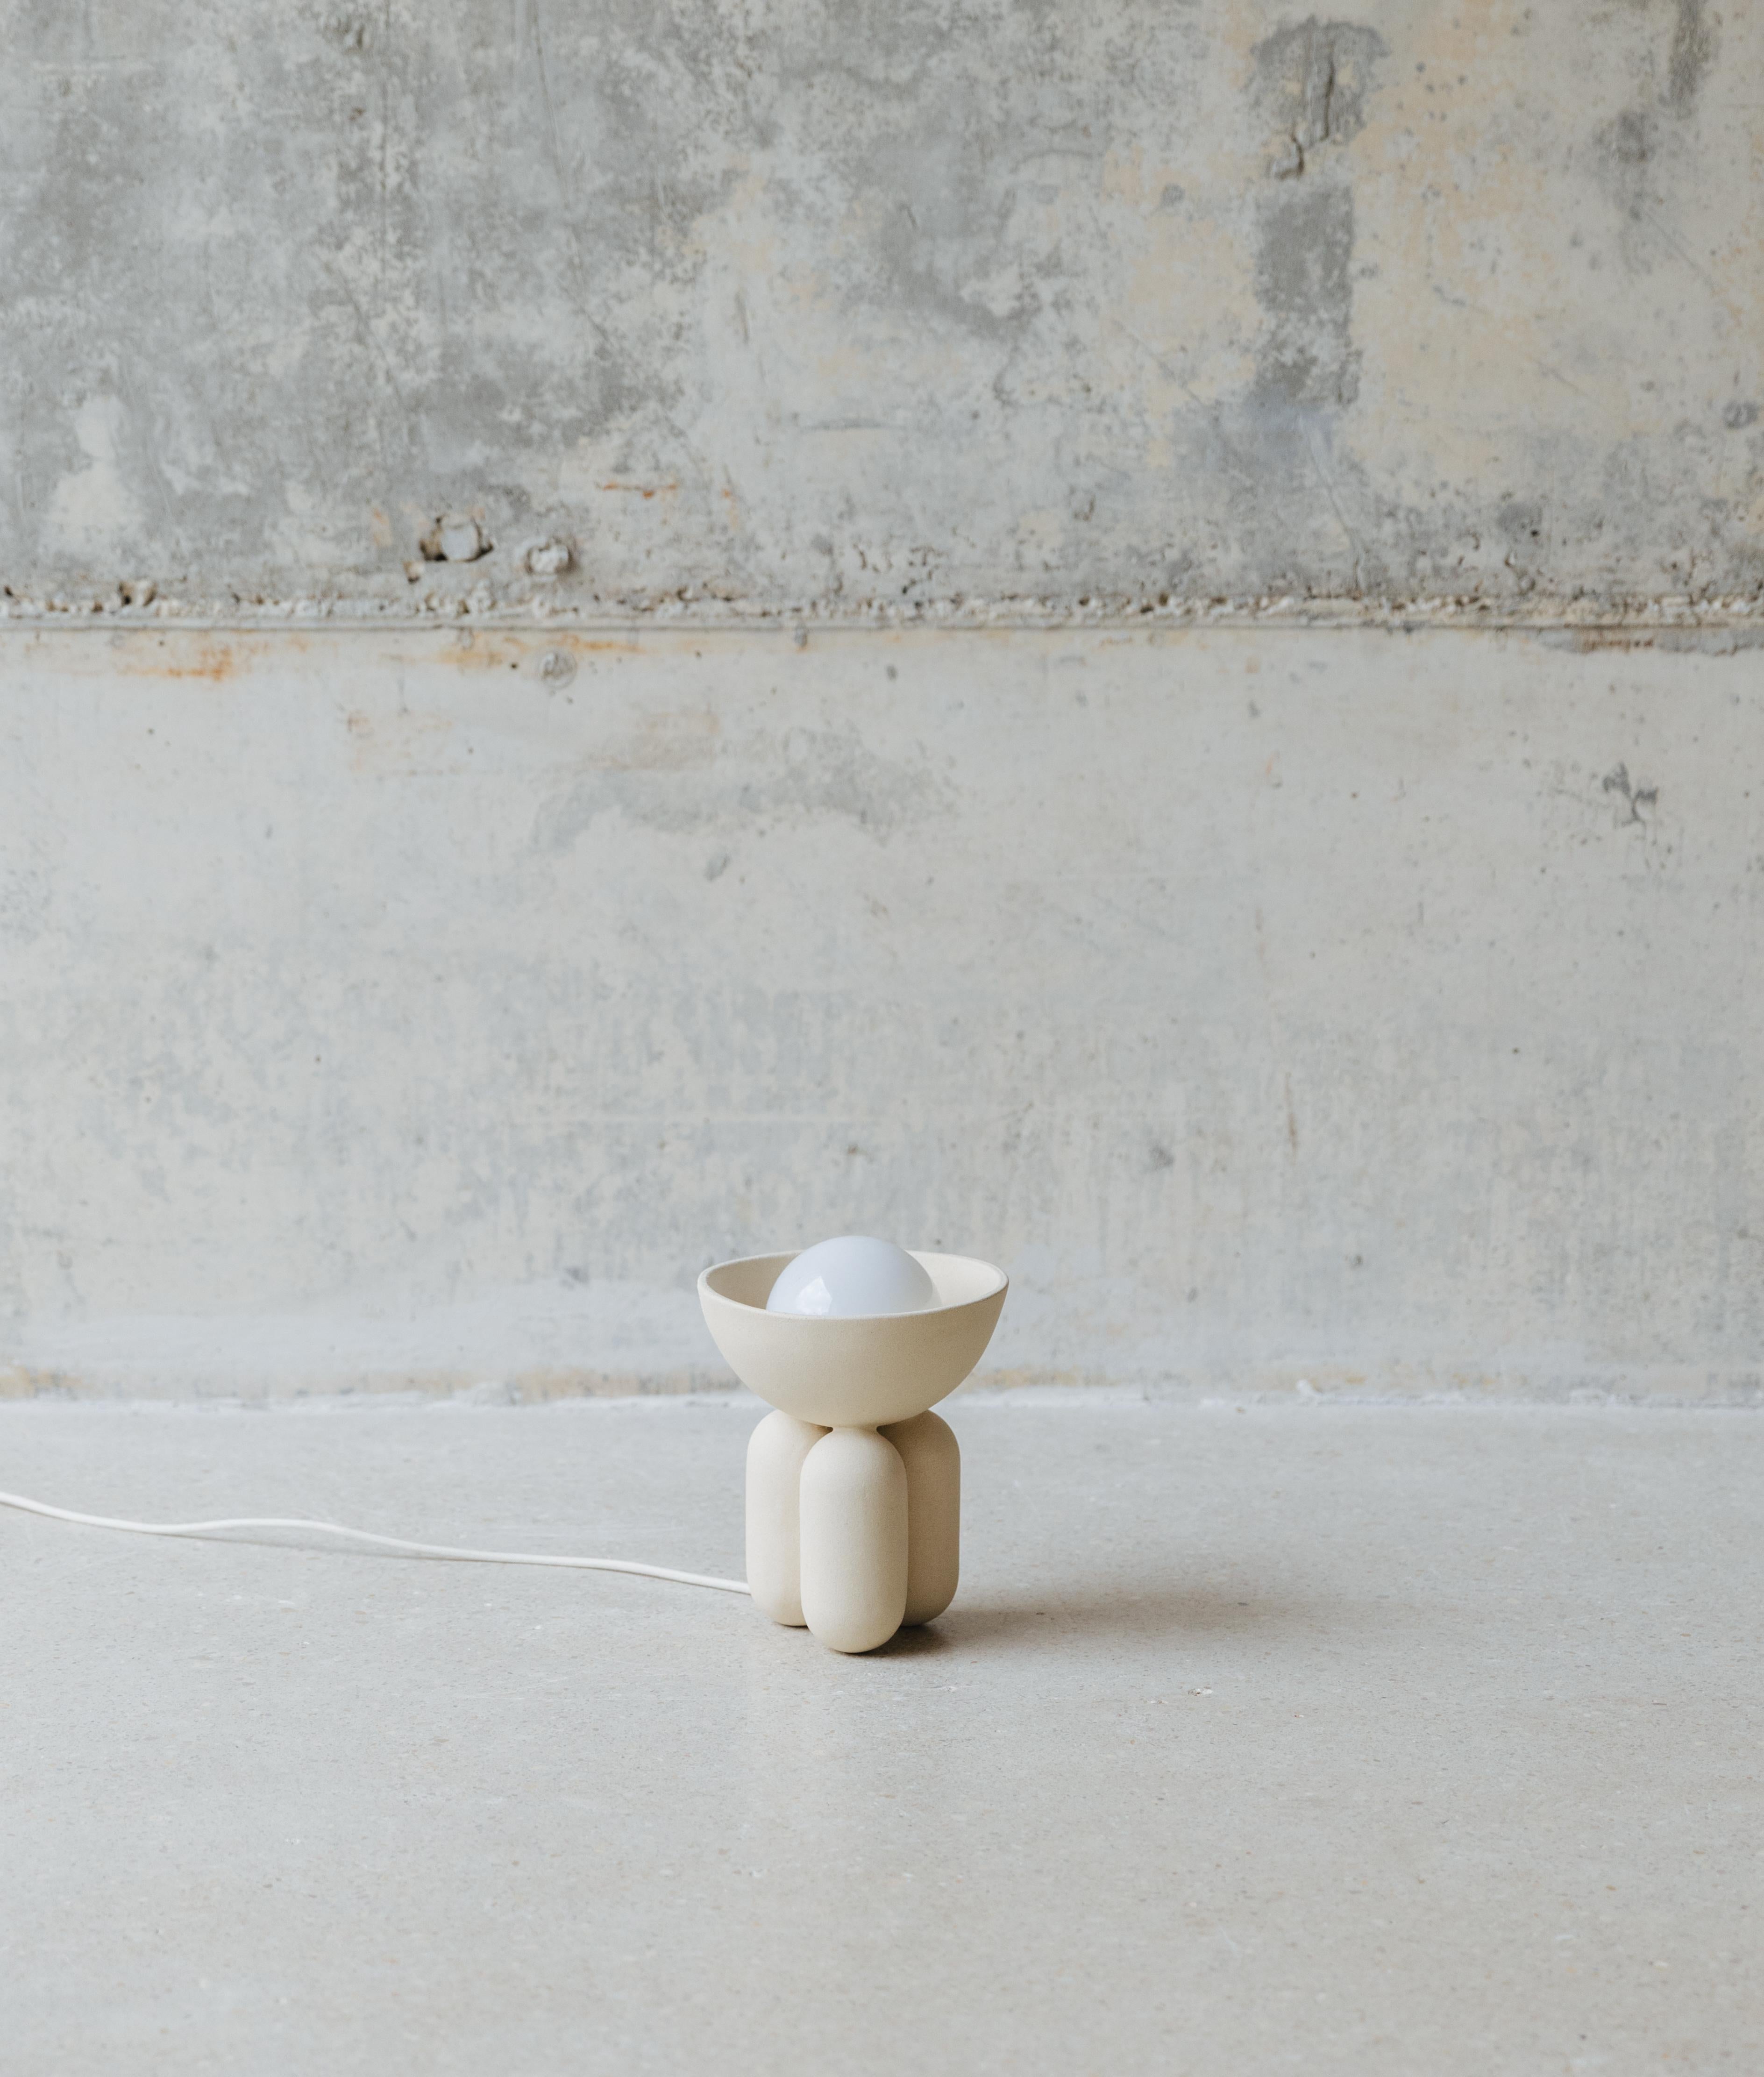 Almond Small Moor Half Sphere Lamp by Lisa Allegra
Dimensions: ø 20 x 27 cm.
Materials: Ceramic.

Also available in Licorice color and in different sizes. Please contact us.

Born in 1986 in Paris, Lisa Allegra has earned in 2010 a degree in